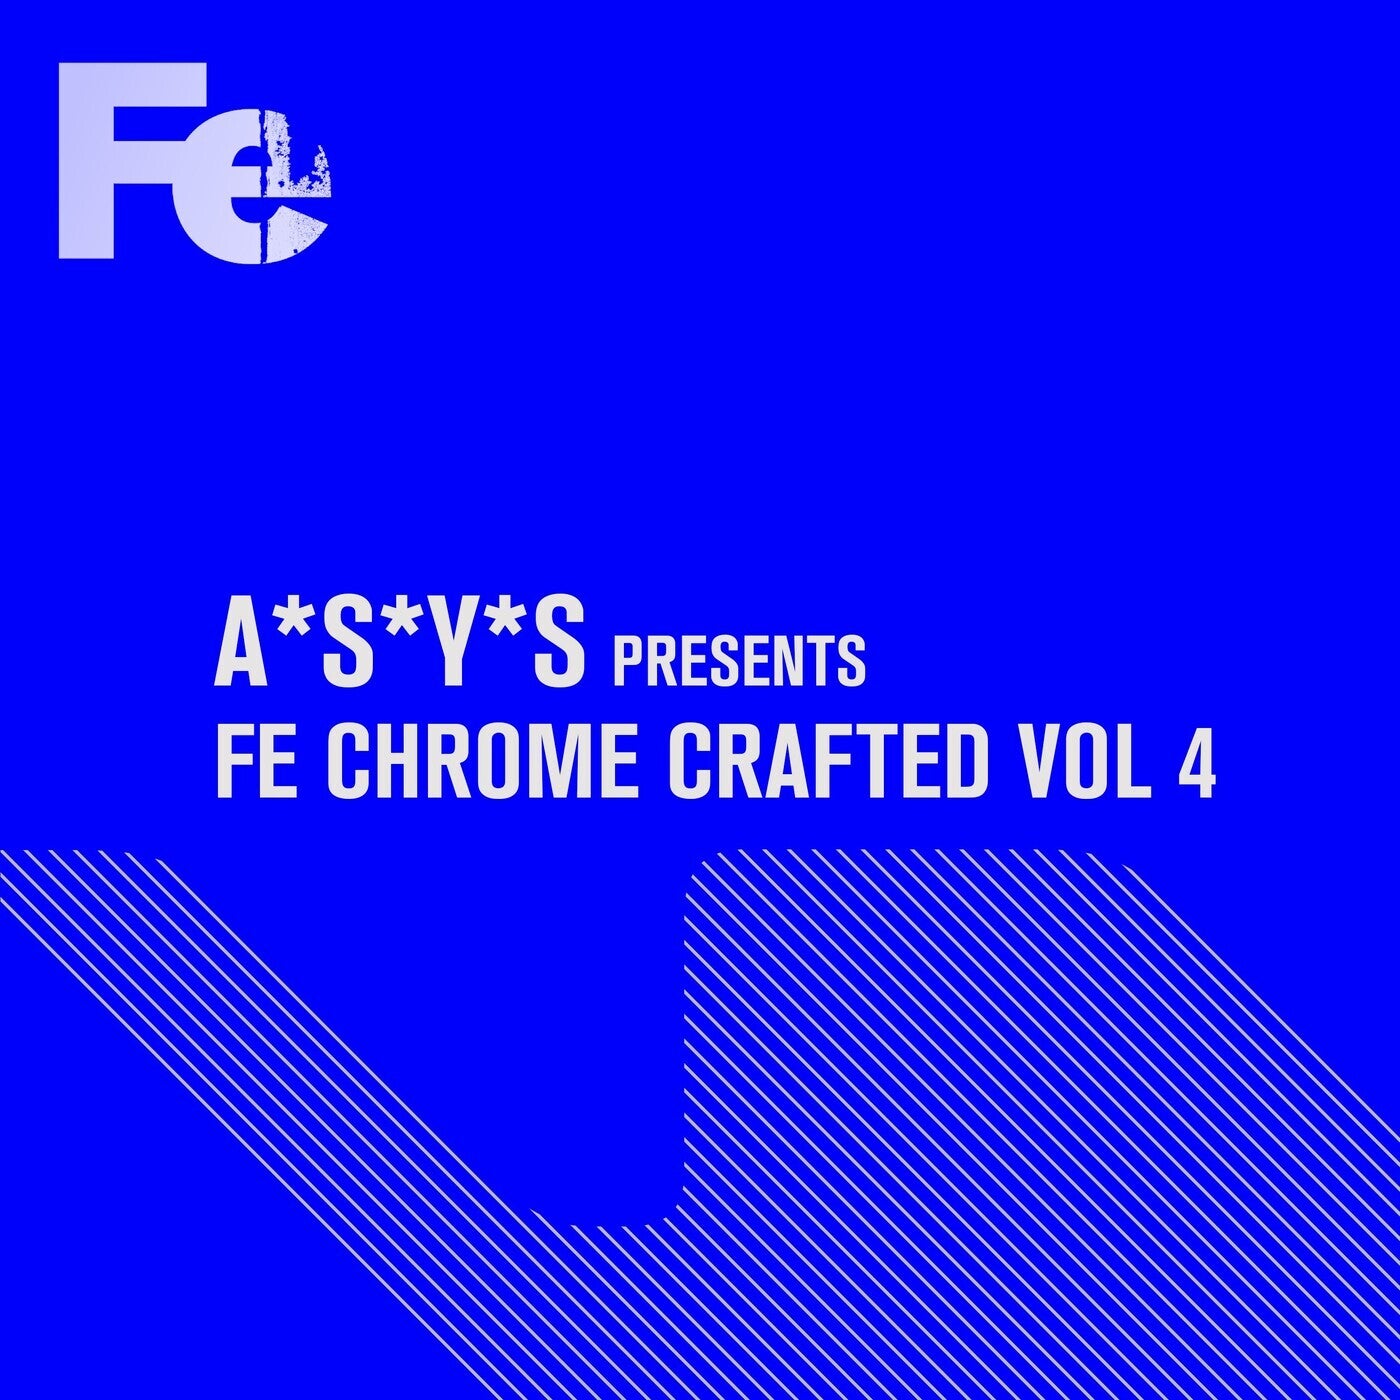 Download A*S*Y*S Presents Fe Chrome Crafted, Vol. 4 on Electrobuzz